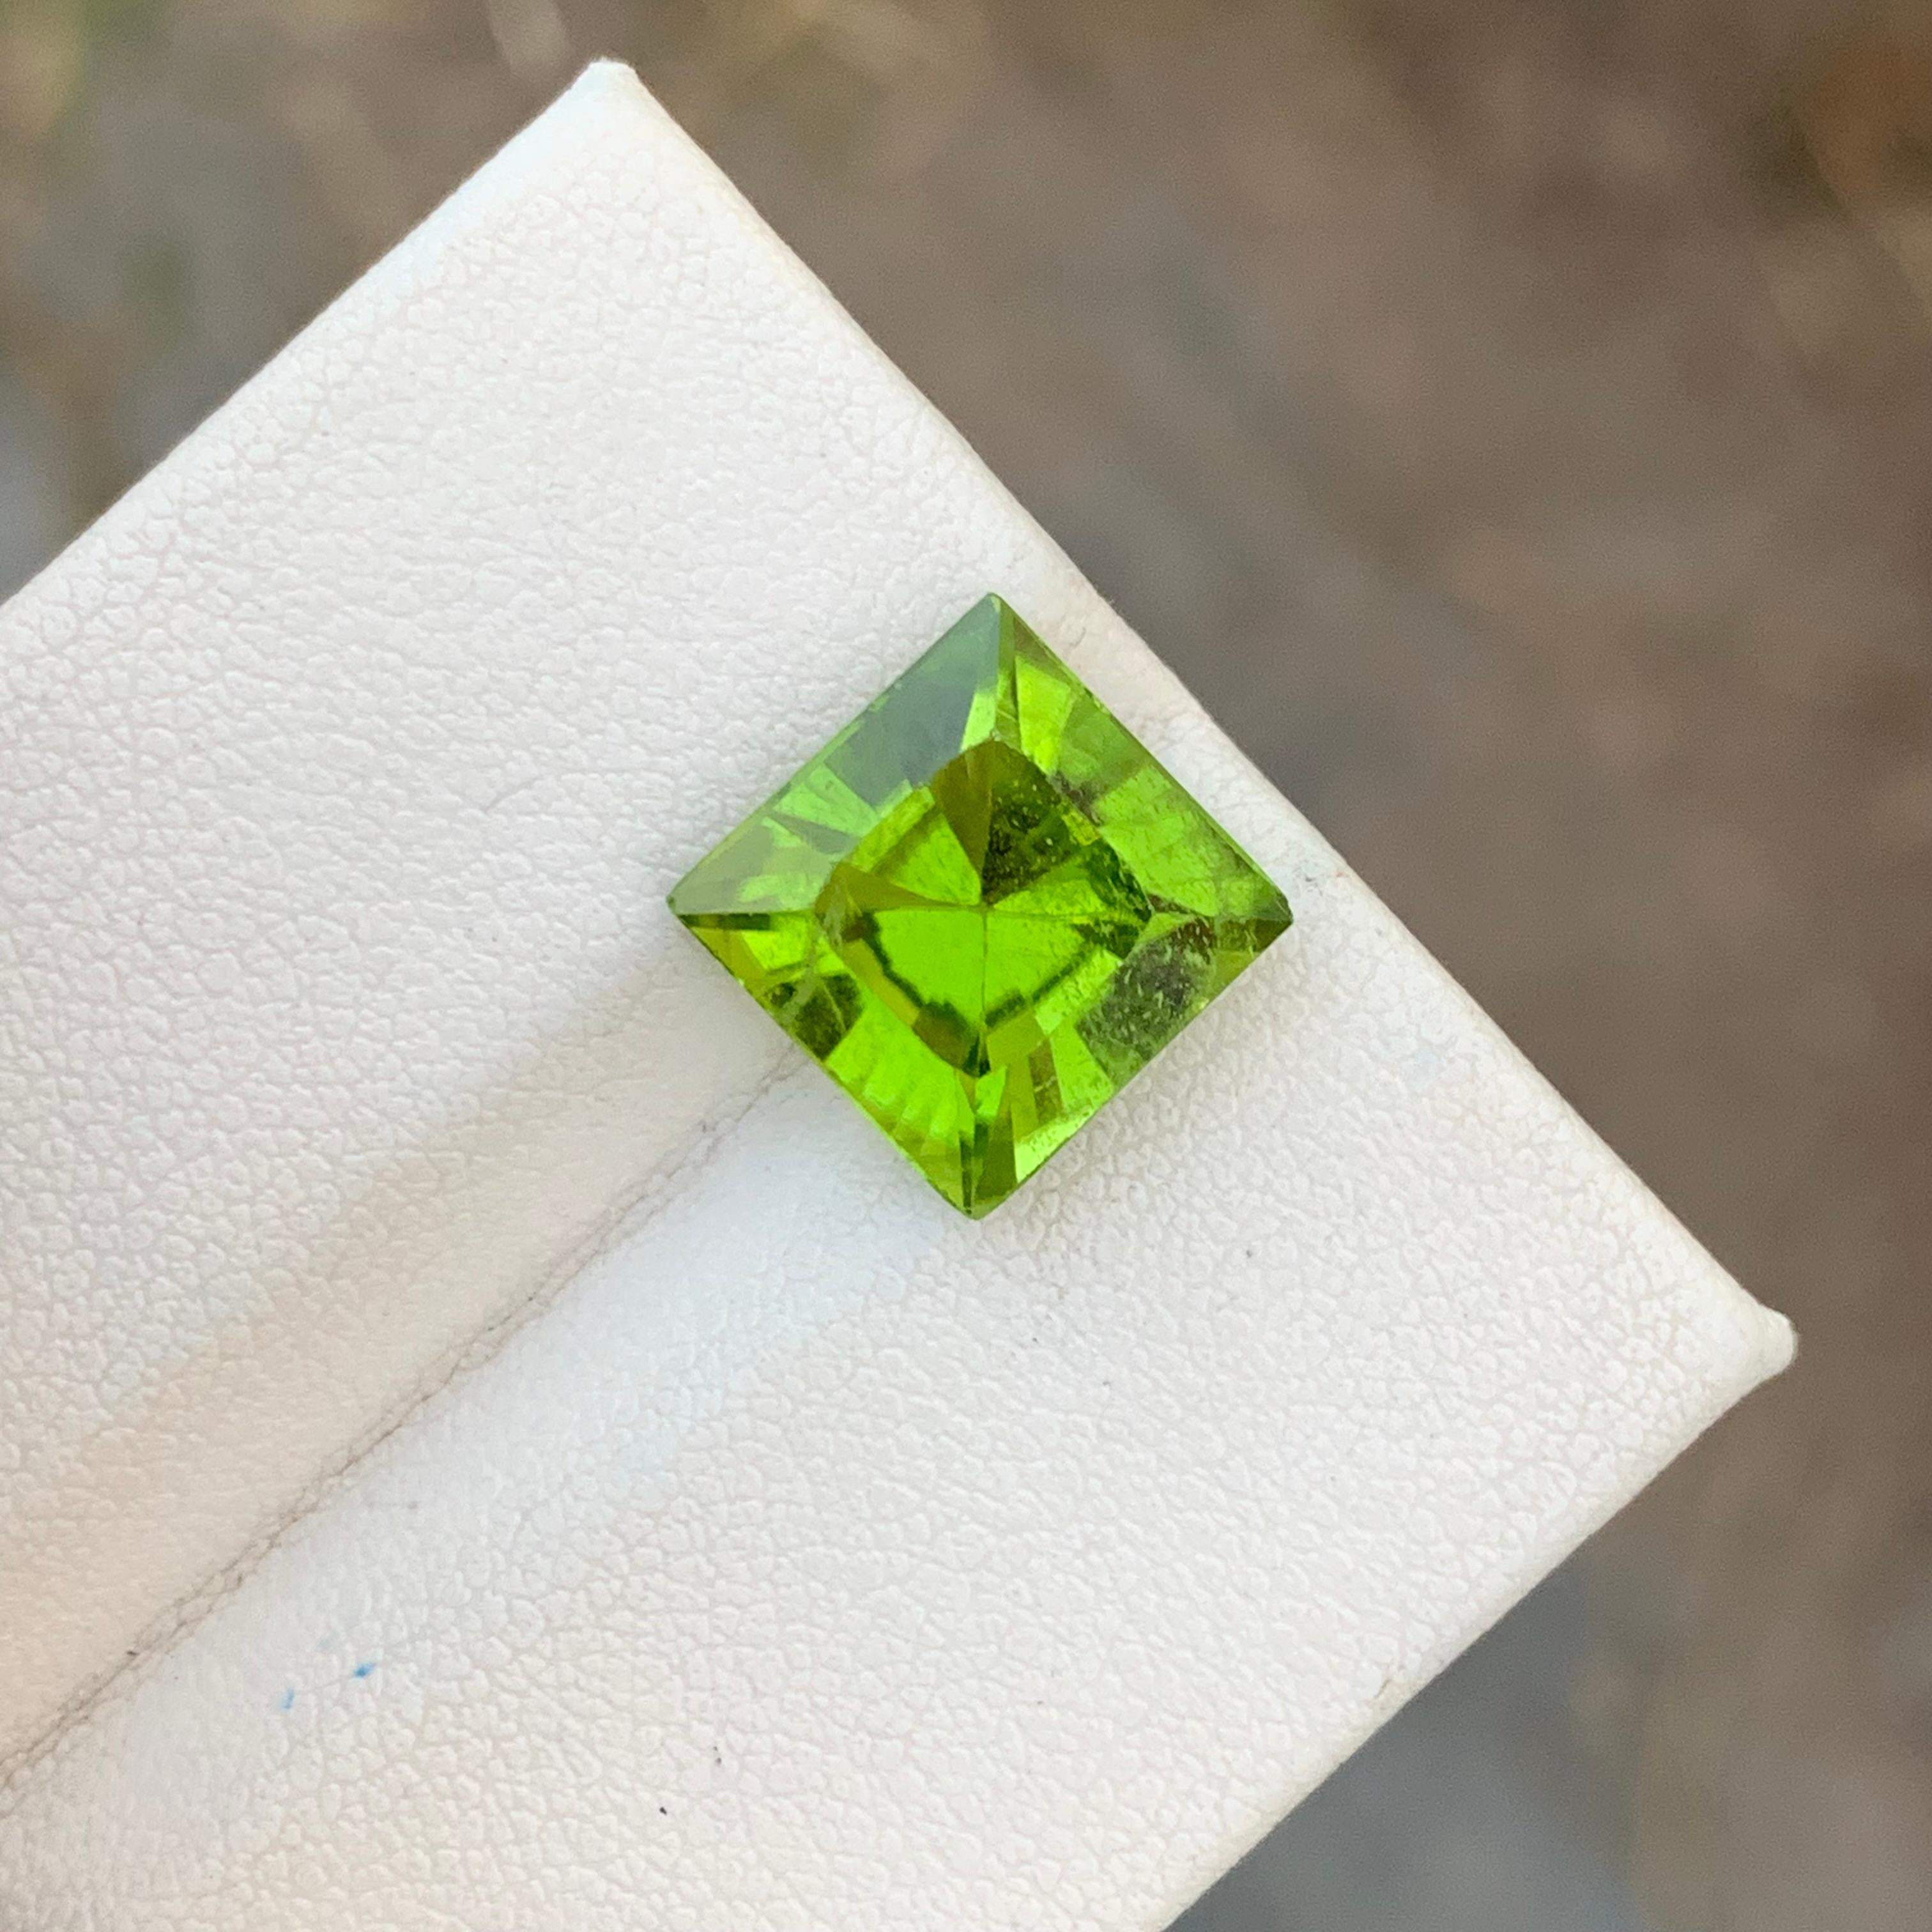 Loose Peridot
Weight: 7.00 Carats
Dimension: 10.6 x 10.6 x 7.4 Mm
Colour: Green
Origin: Supat Valley, Pakistan
Shape: Square
Certificate: On Demand
Treatment: Non 

Peridot, a vibrant and lustrous gemstone, has been cherished for centuries for its